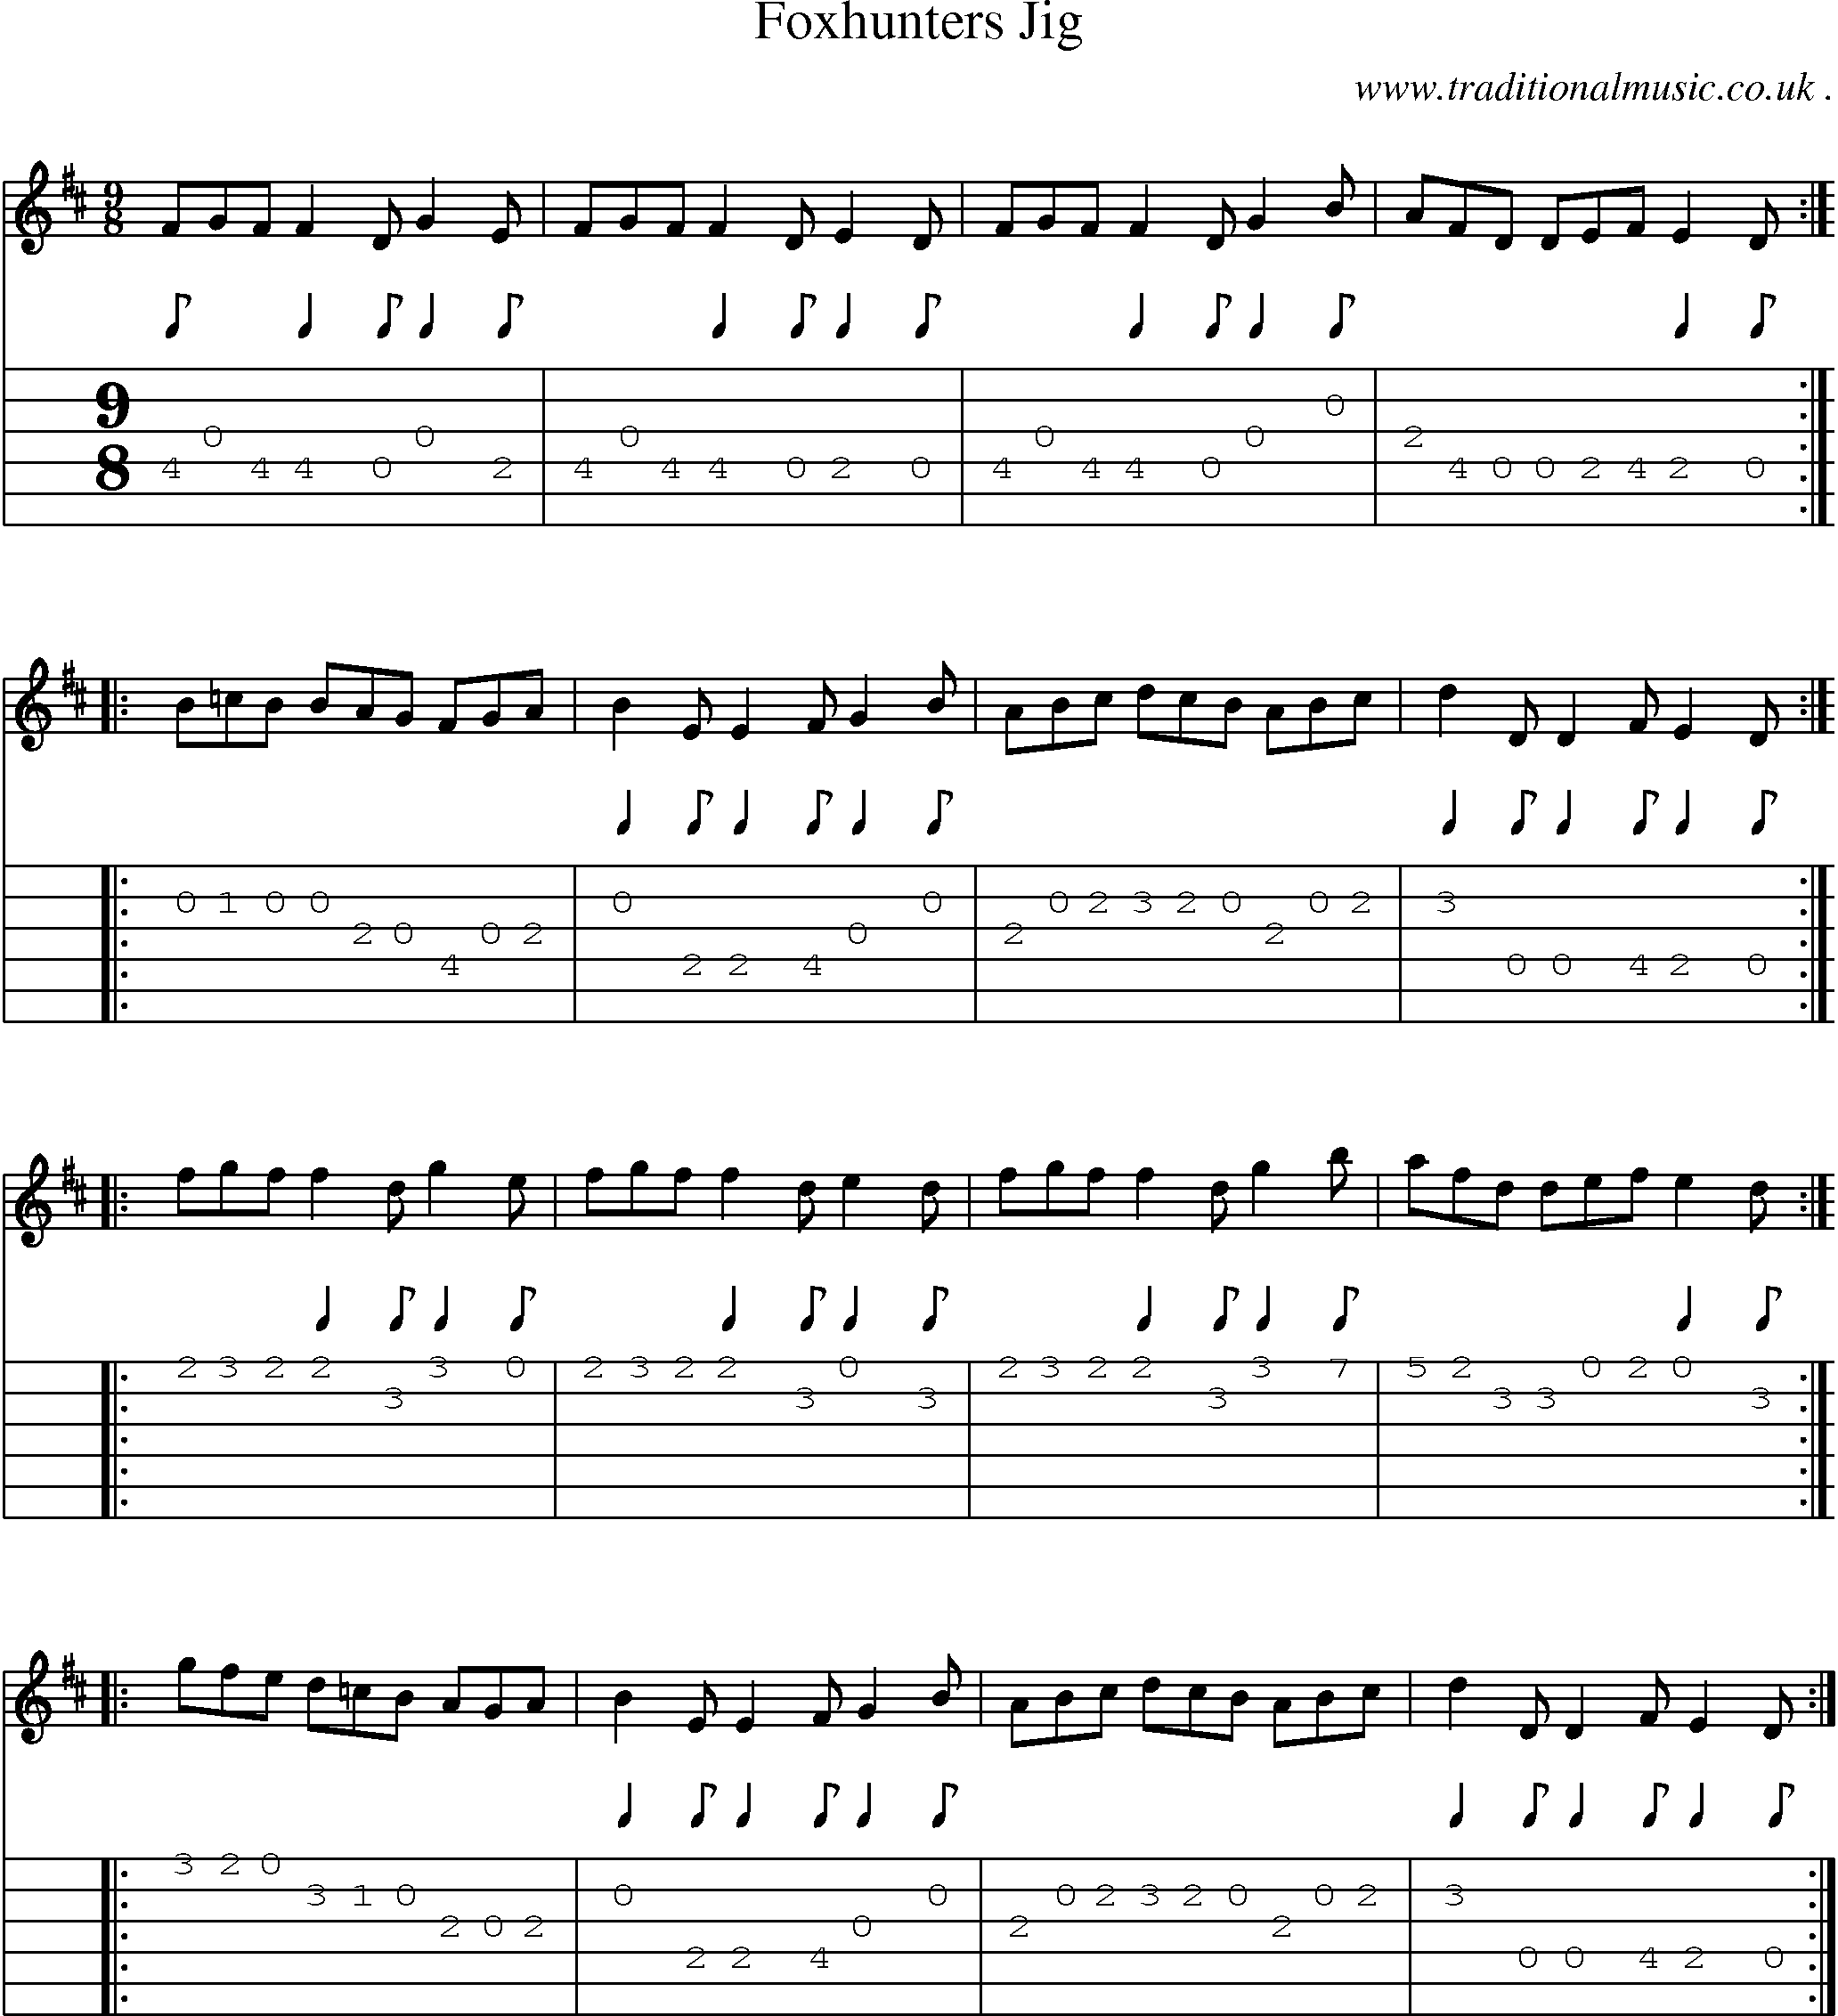 Sheet-Music and Guitar Tabs for Foxhunters Jig